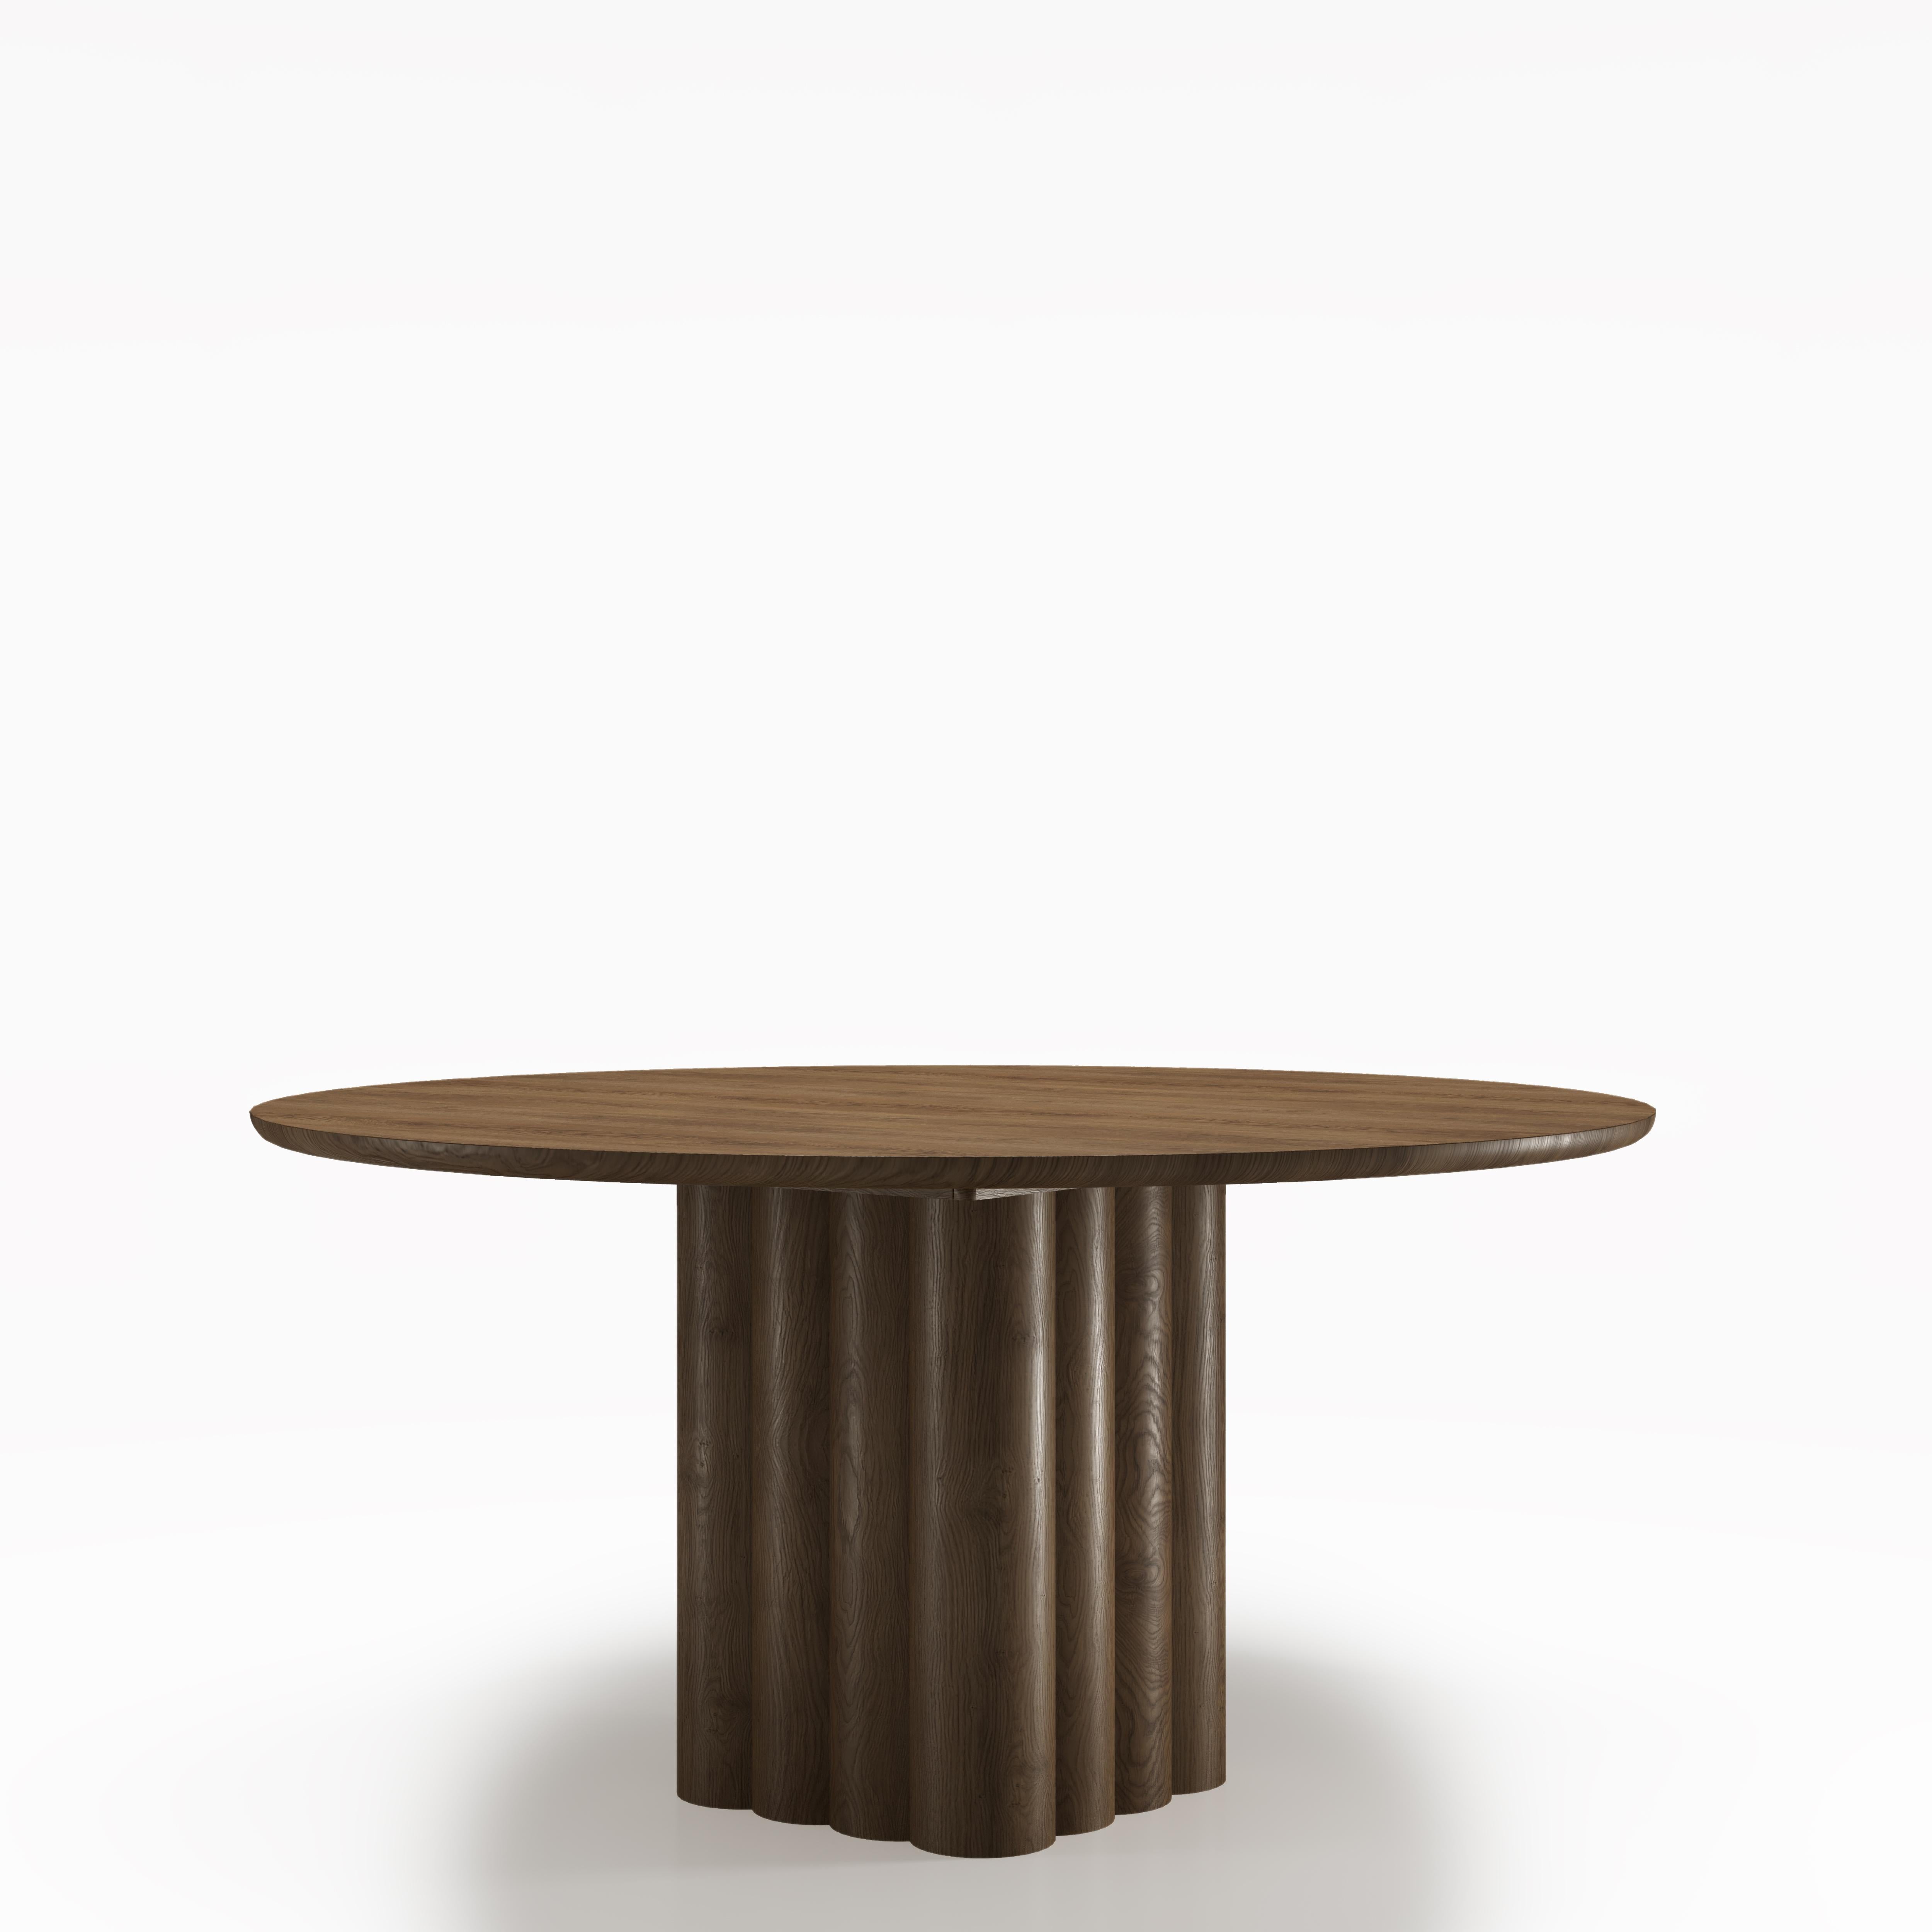 Danish Round Dining Table 'Plush' by Dk3, Smoked Oak or Walnut, 150 cm For Sale